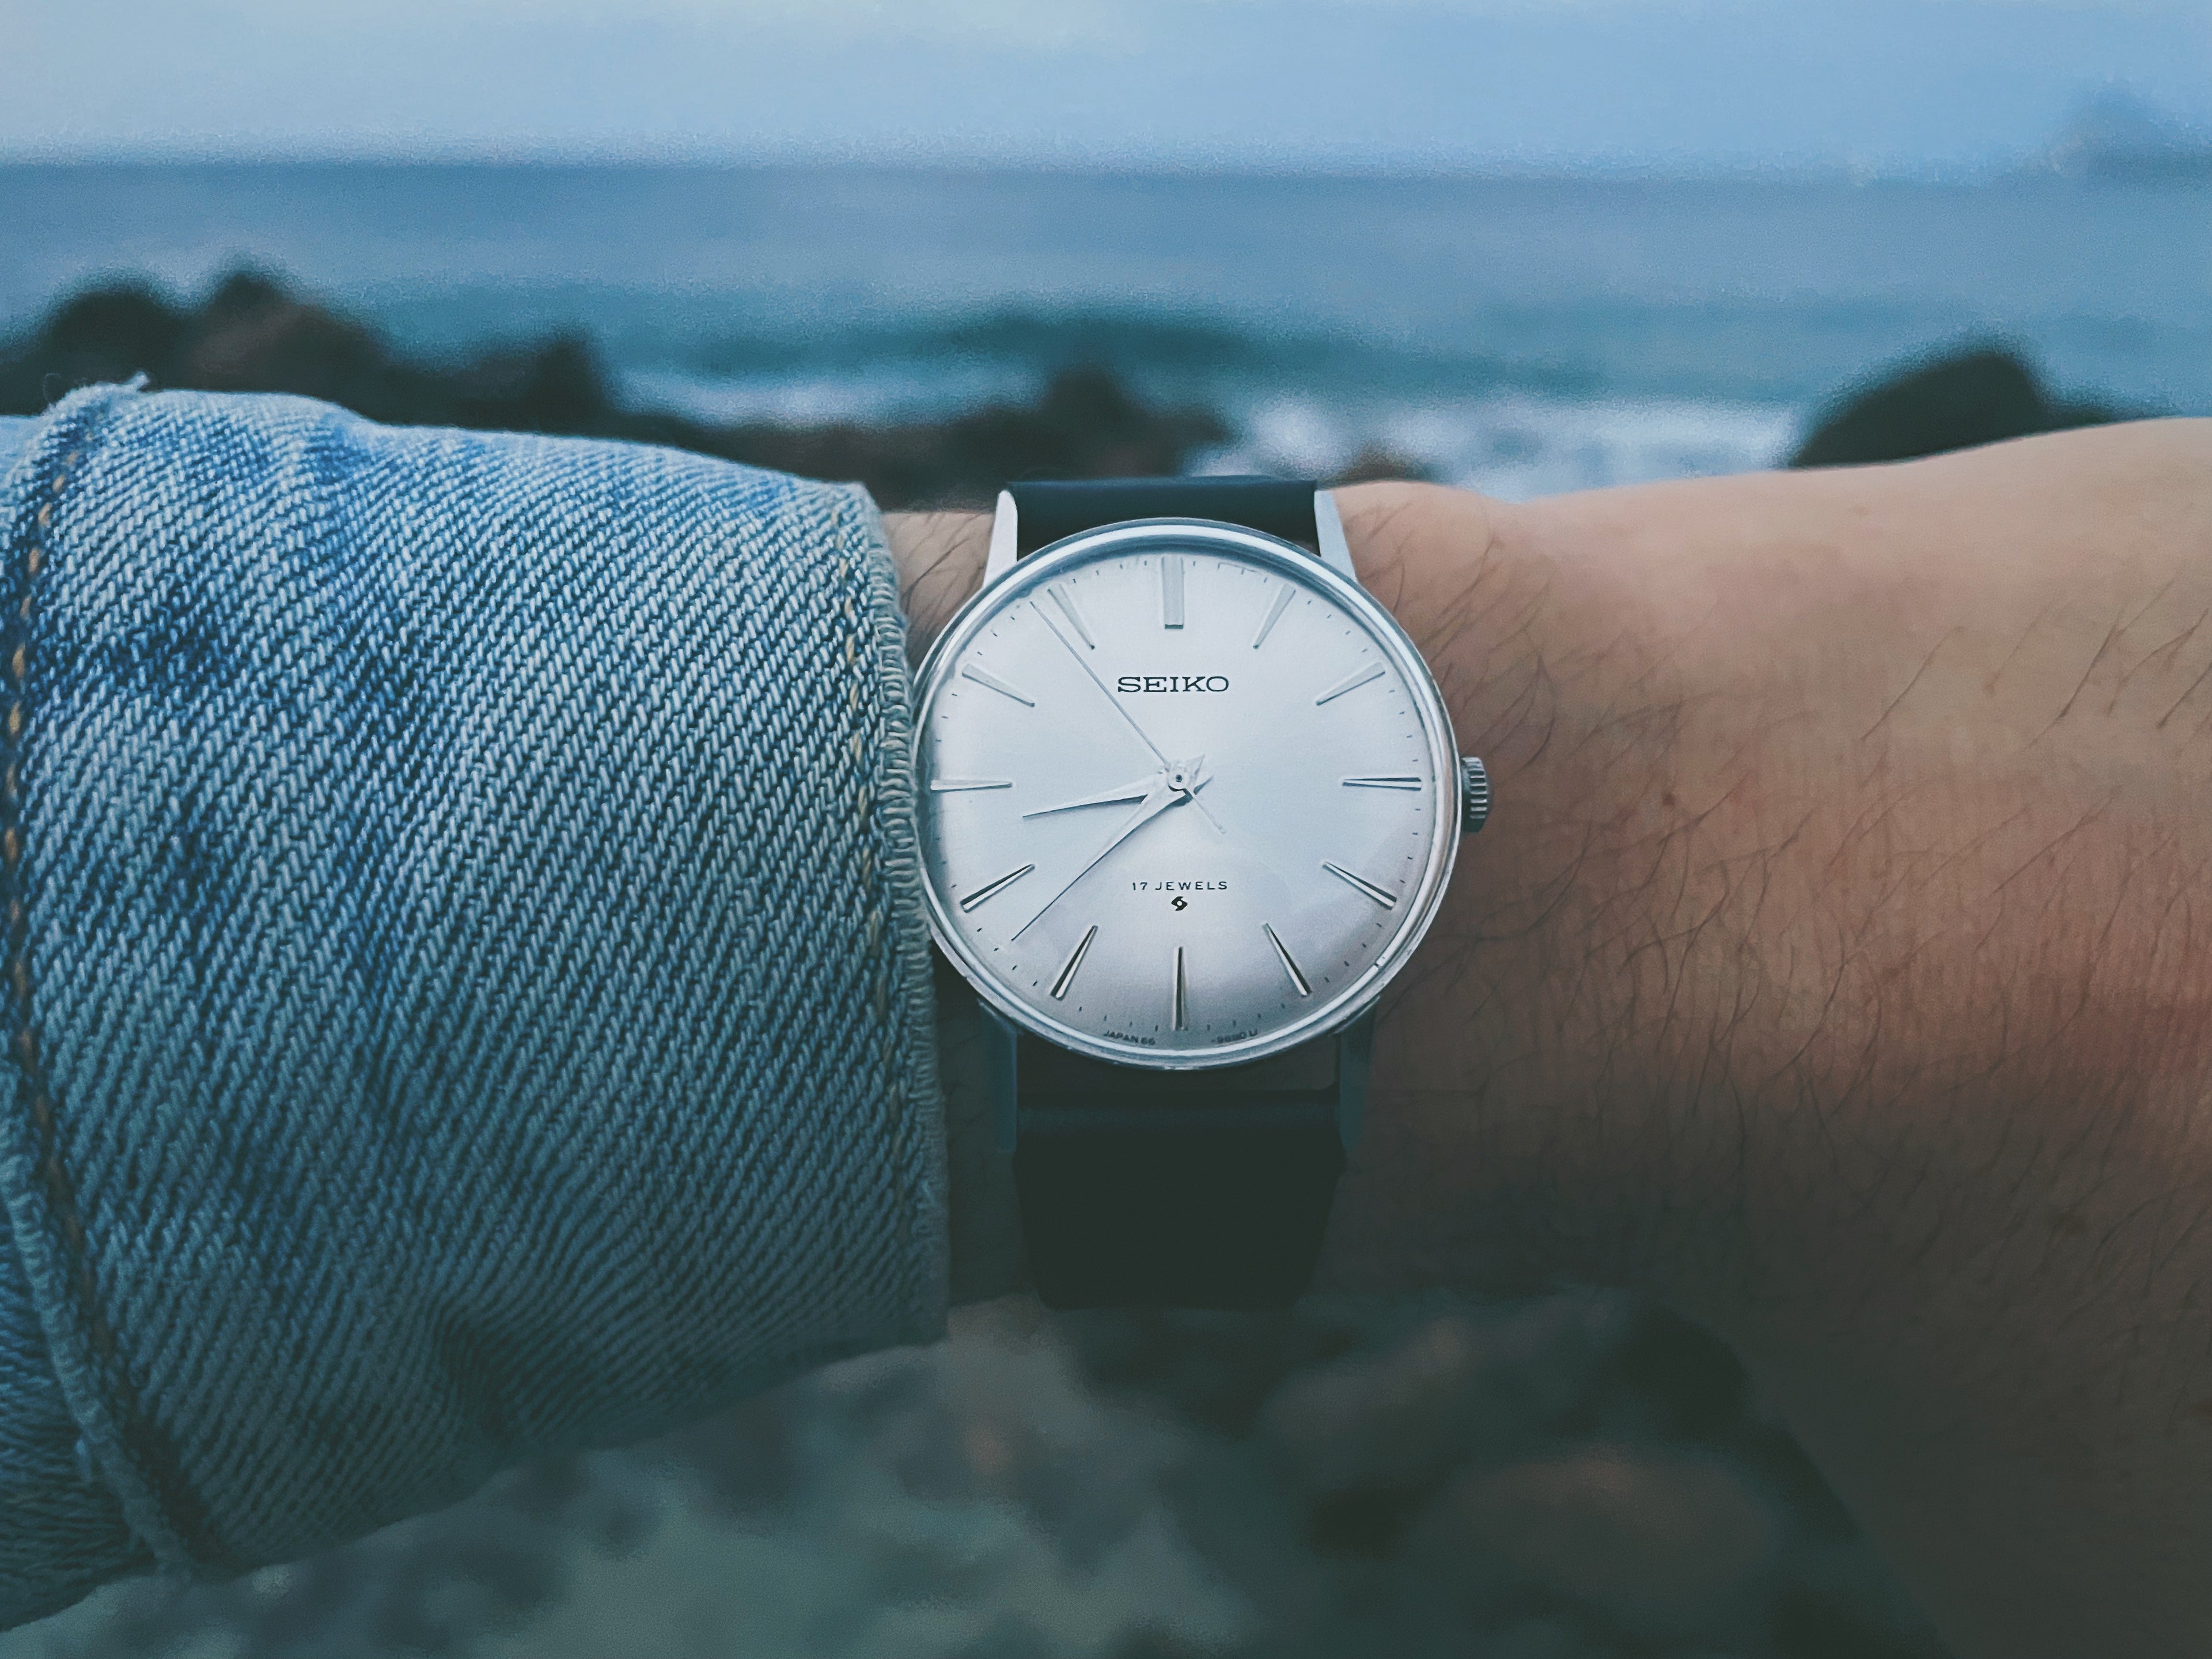 Vintage Seiko on wrist with waves on the background